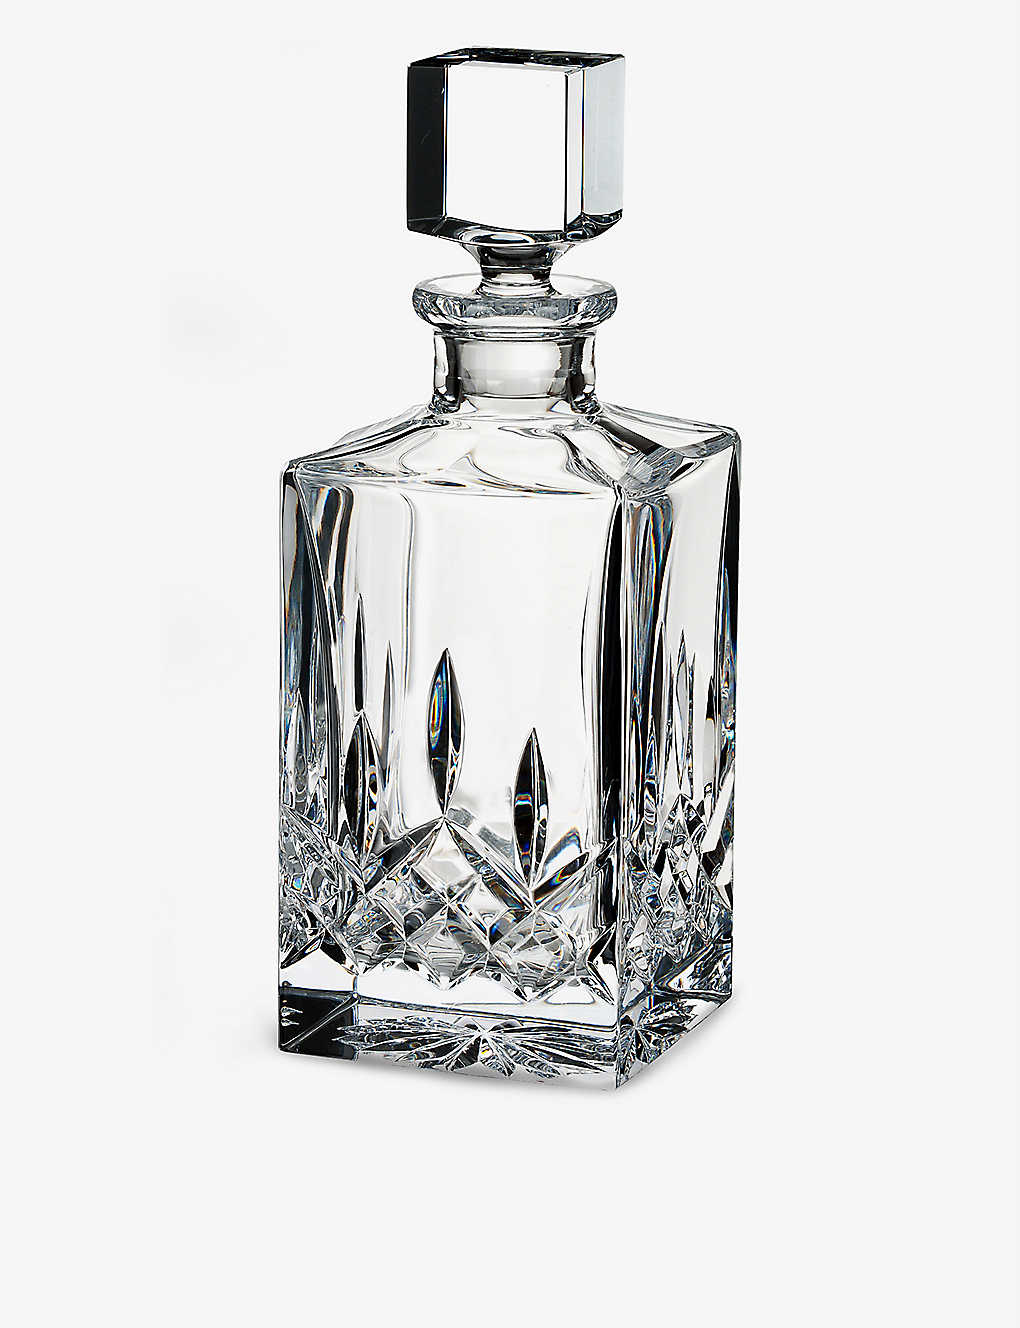 Shop Waterford Lismore Crystal Decanter 750ml